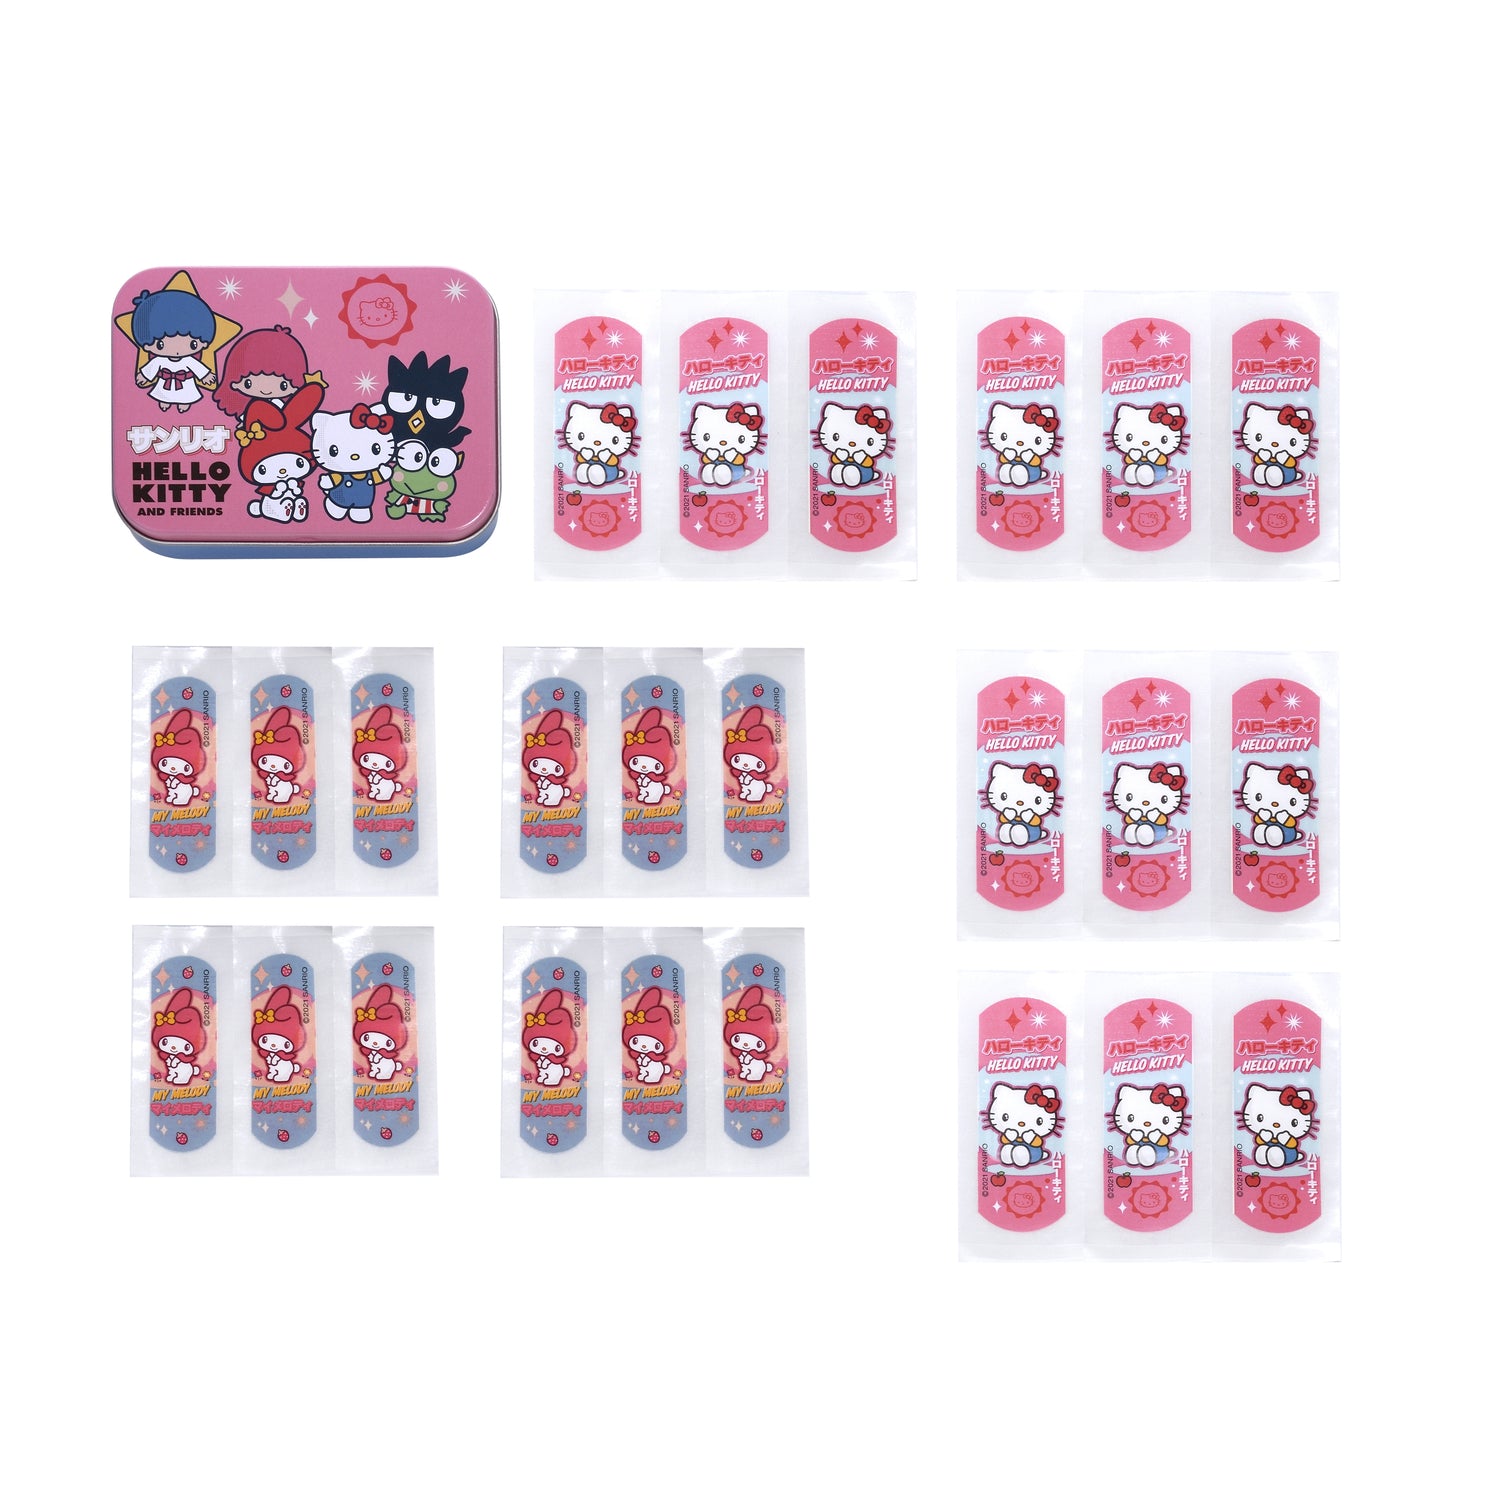 SET CEROTTI HELLO KITTY AND FRIENDS